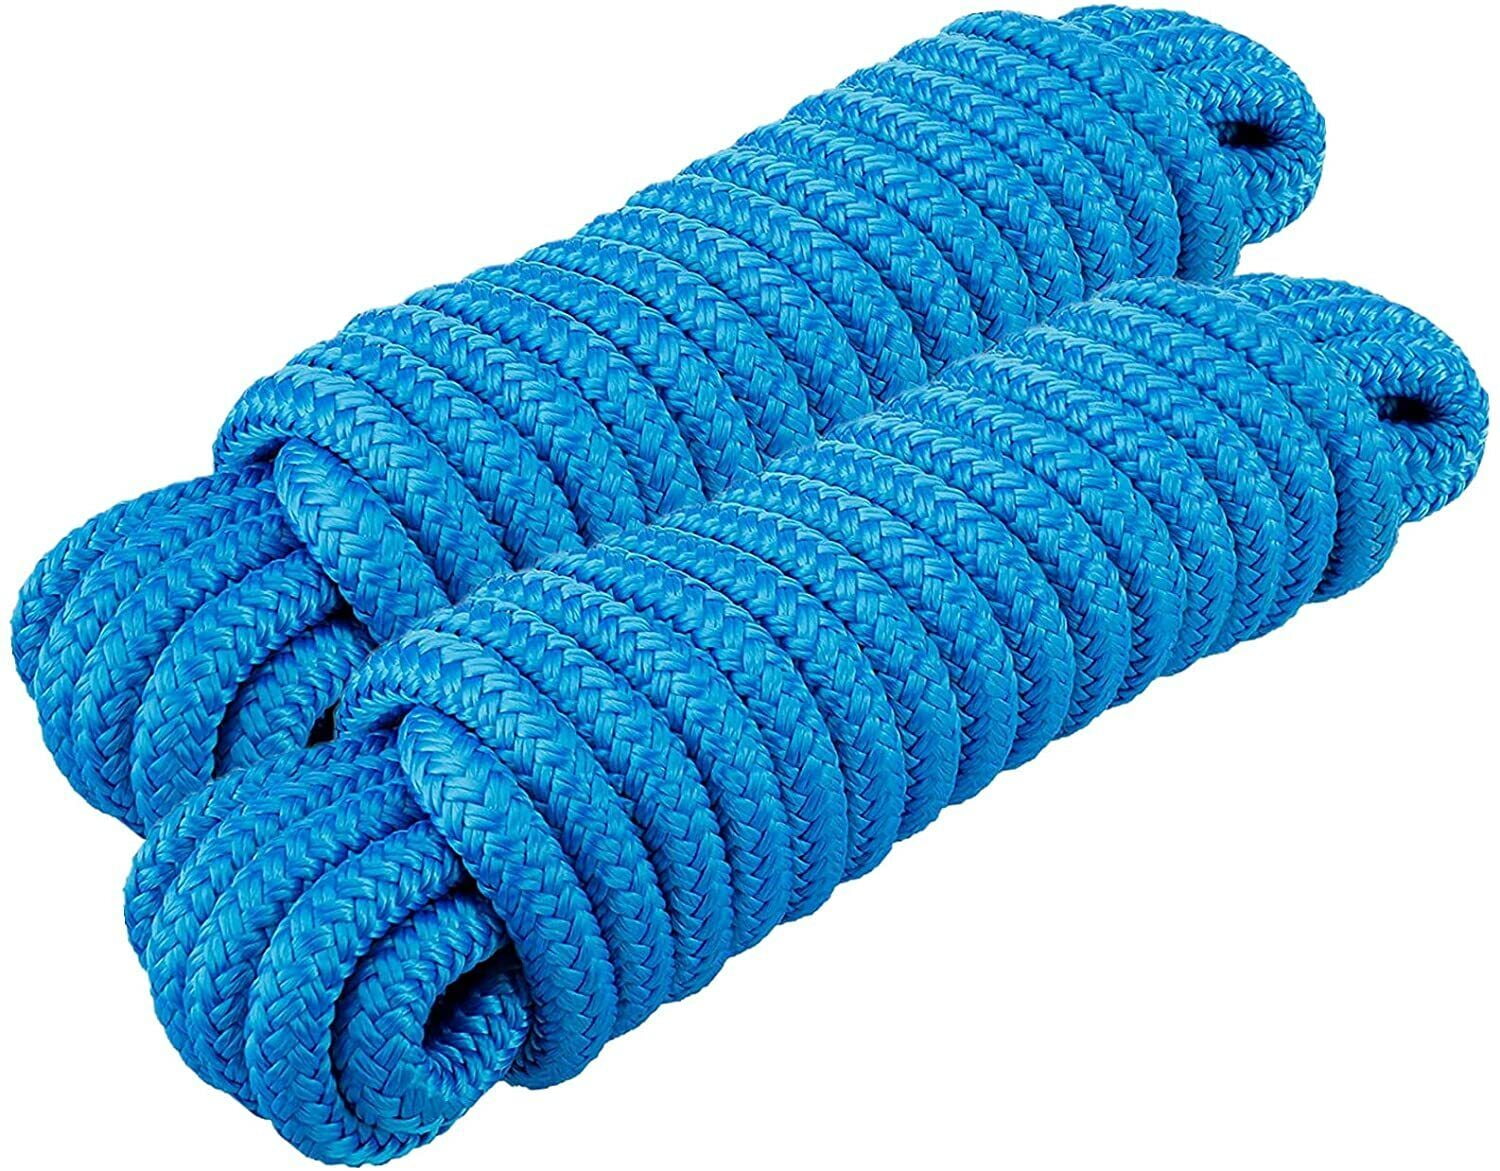 2 Pcs 3/8 x 15' Boat Dock Lines Marine Rope Mooring Rope Double